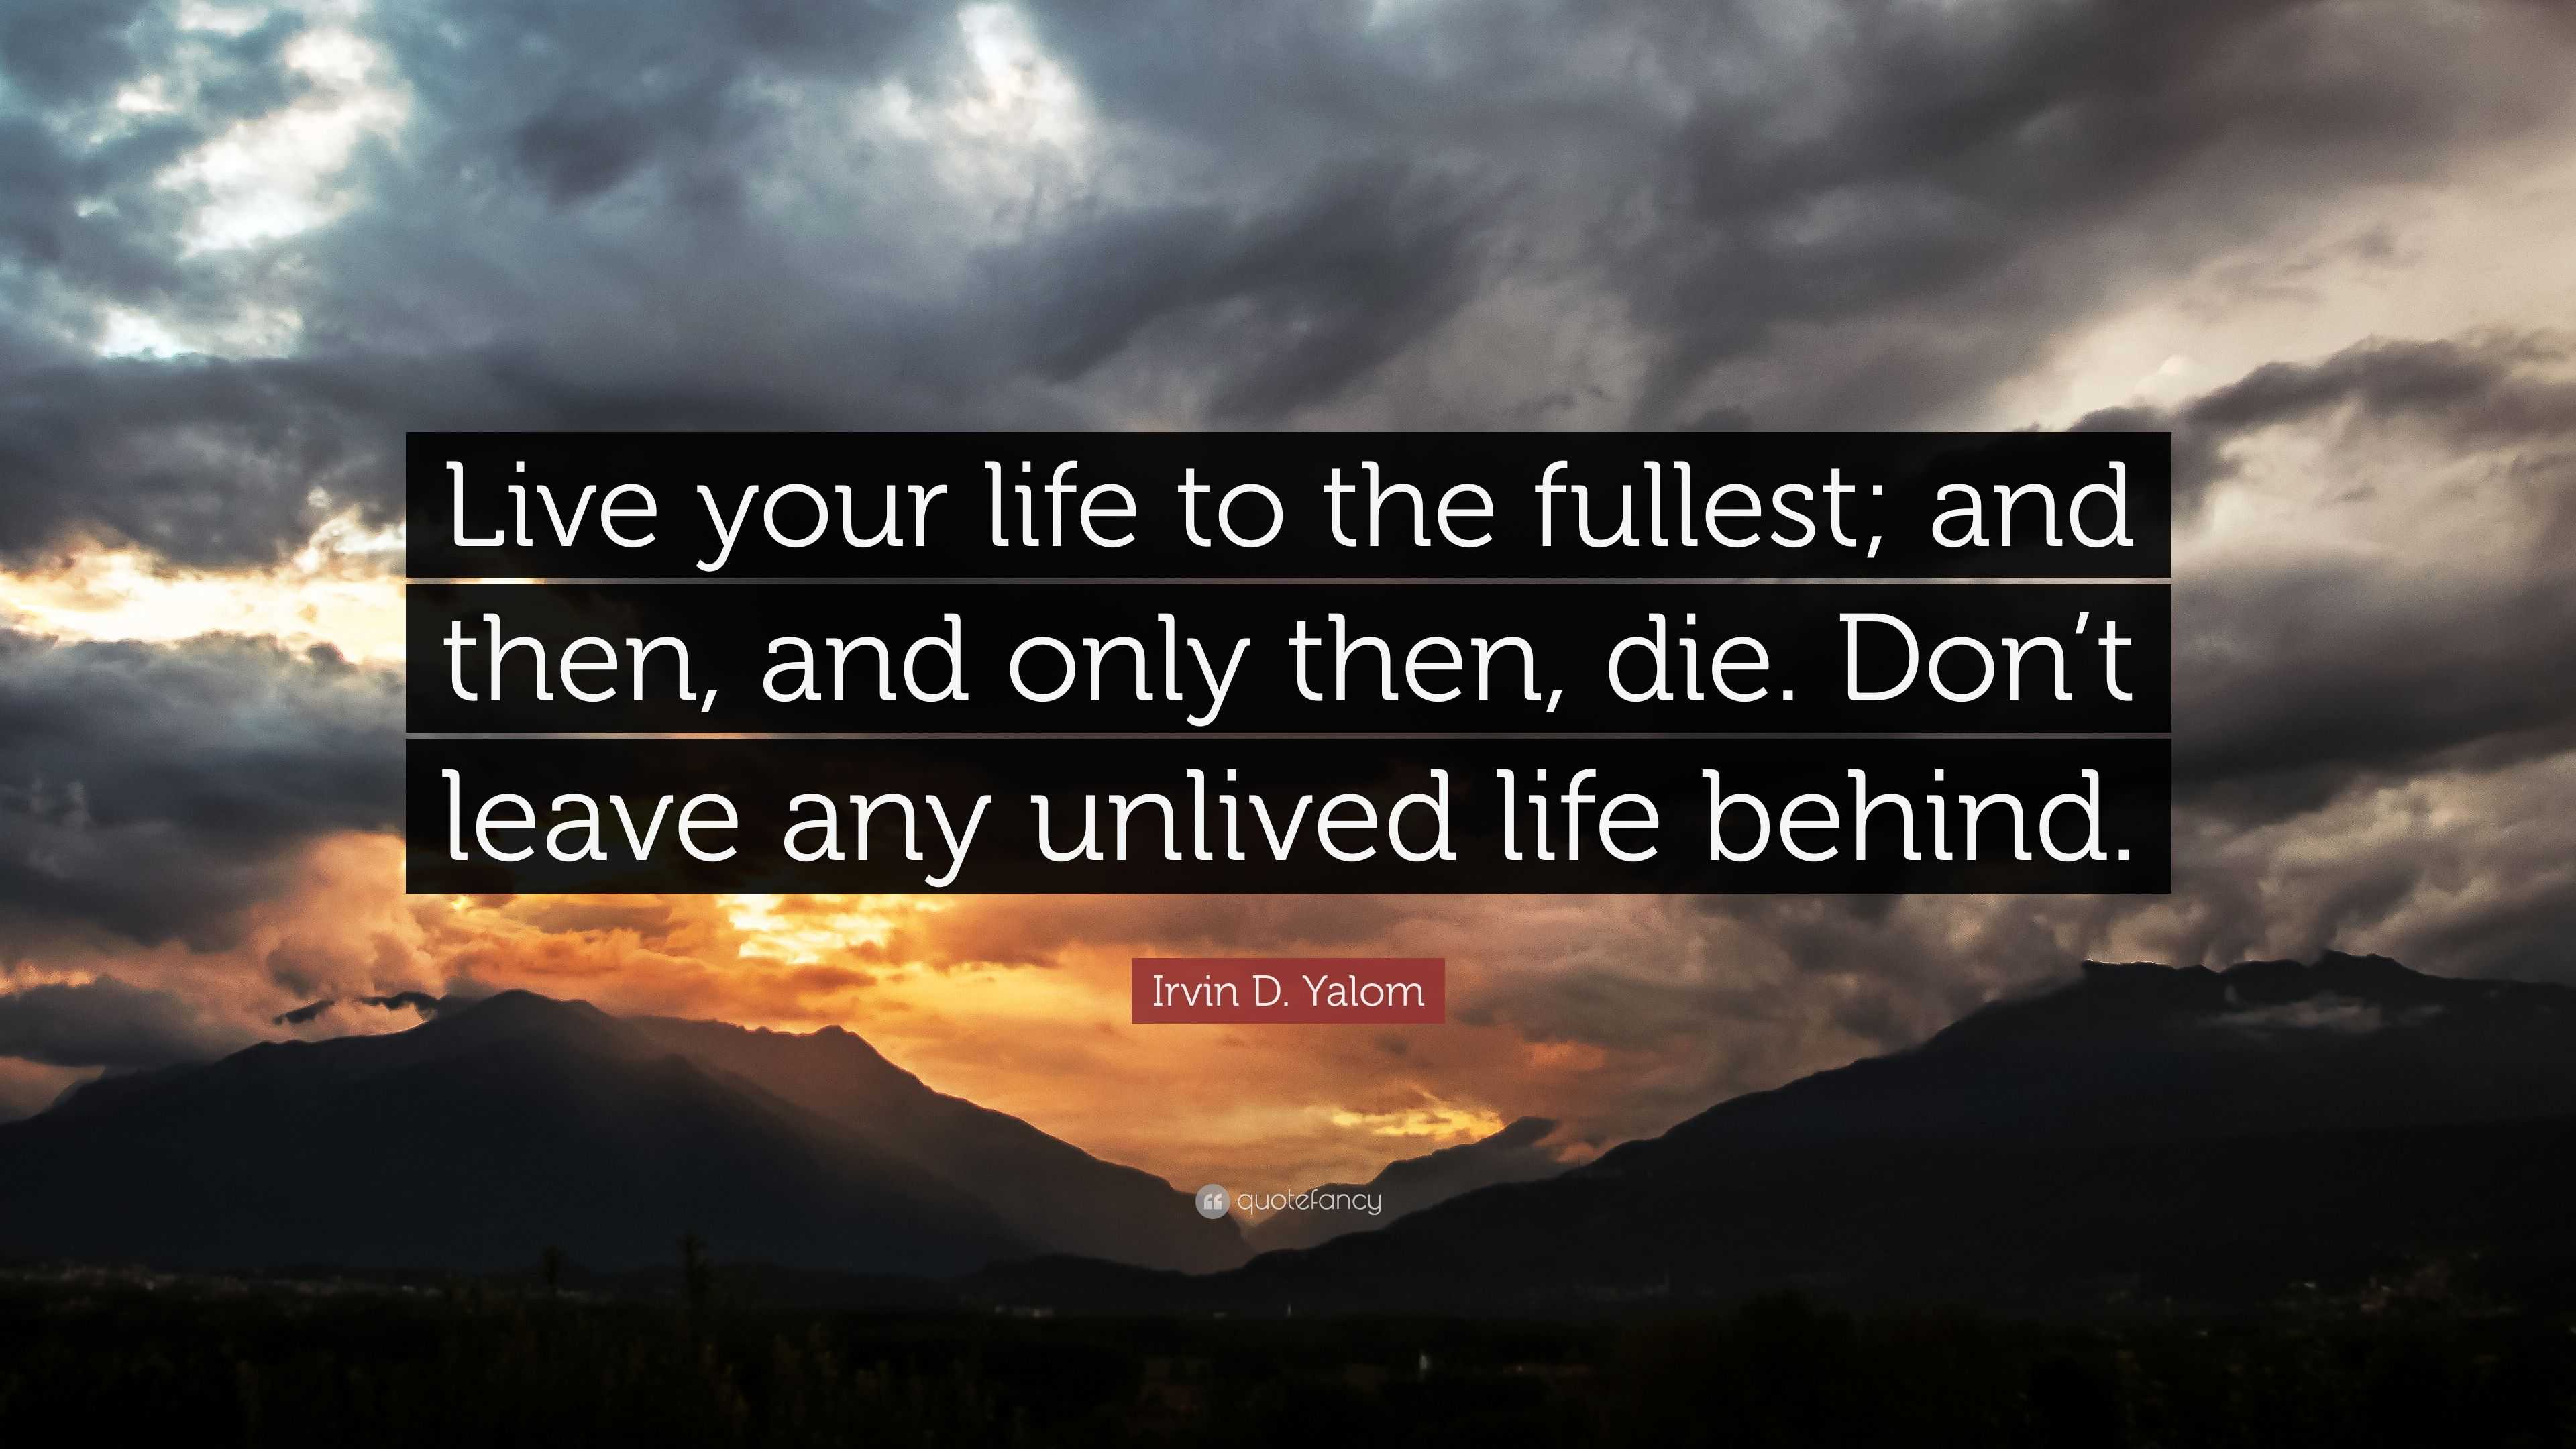 Irvin D Yalom Quote “Live your life to the fullest and then